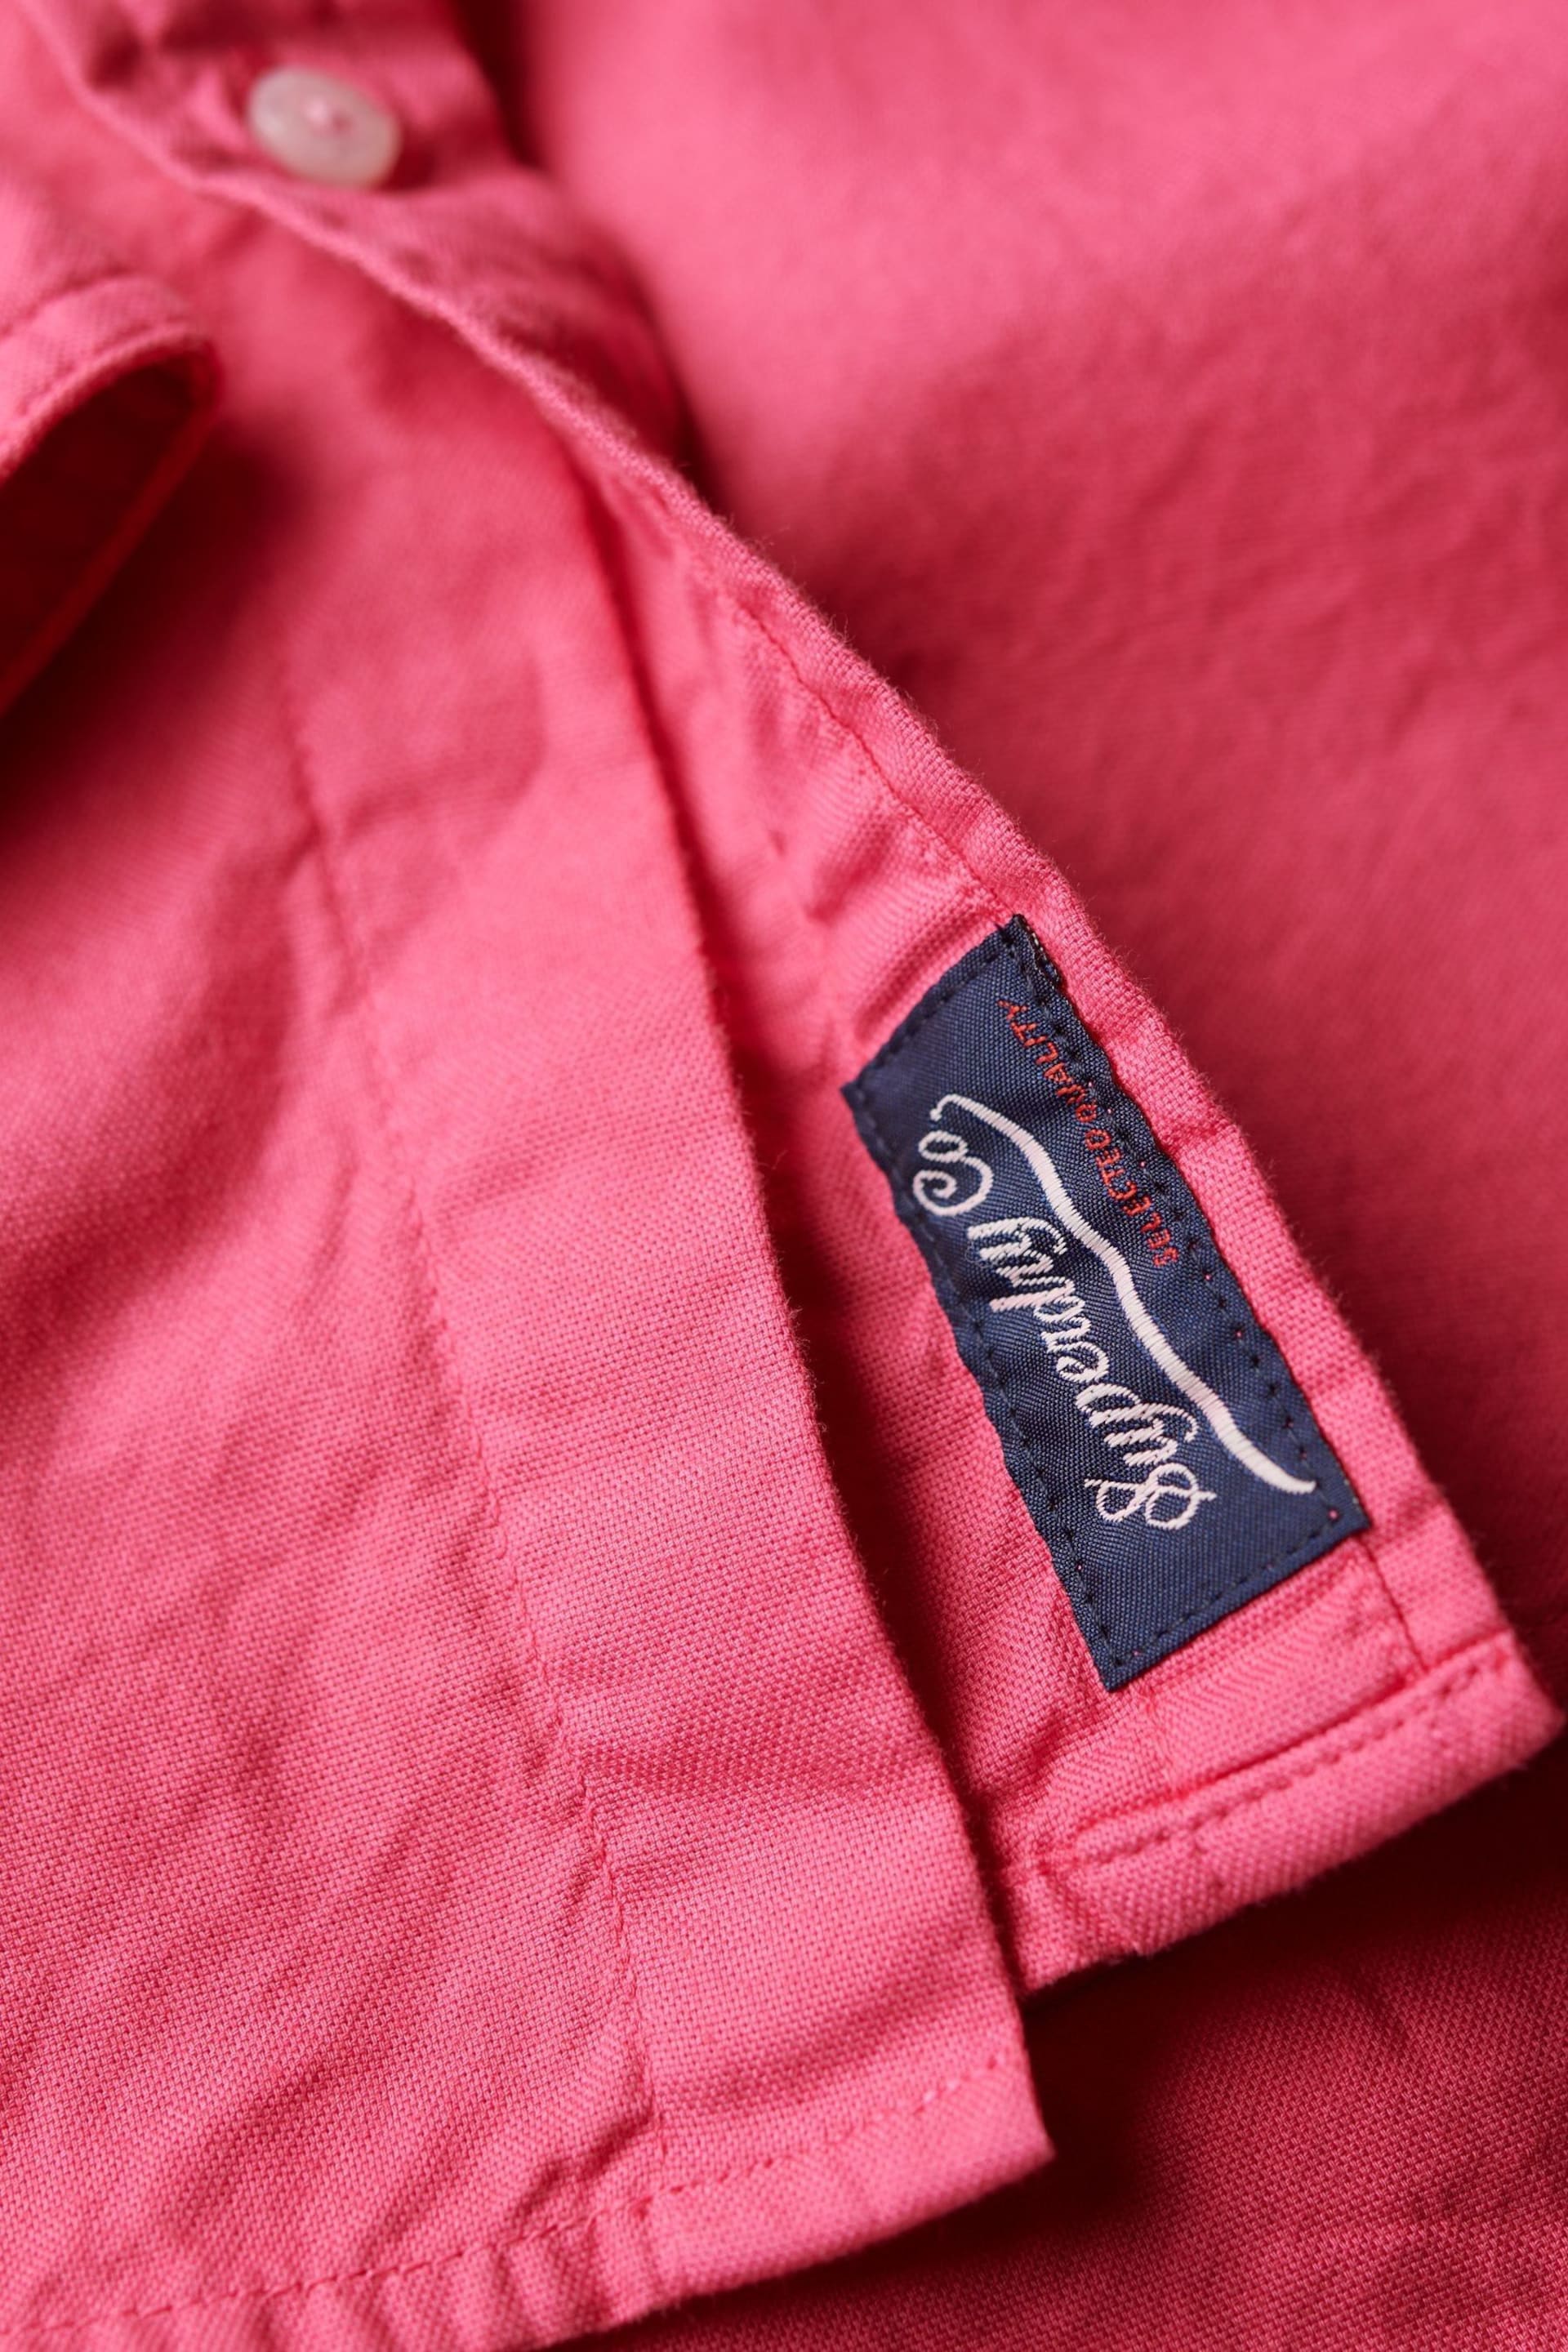 Superdry Pink Overdyed Cotton Long Sleeved Shirt - Image 6 of 6